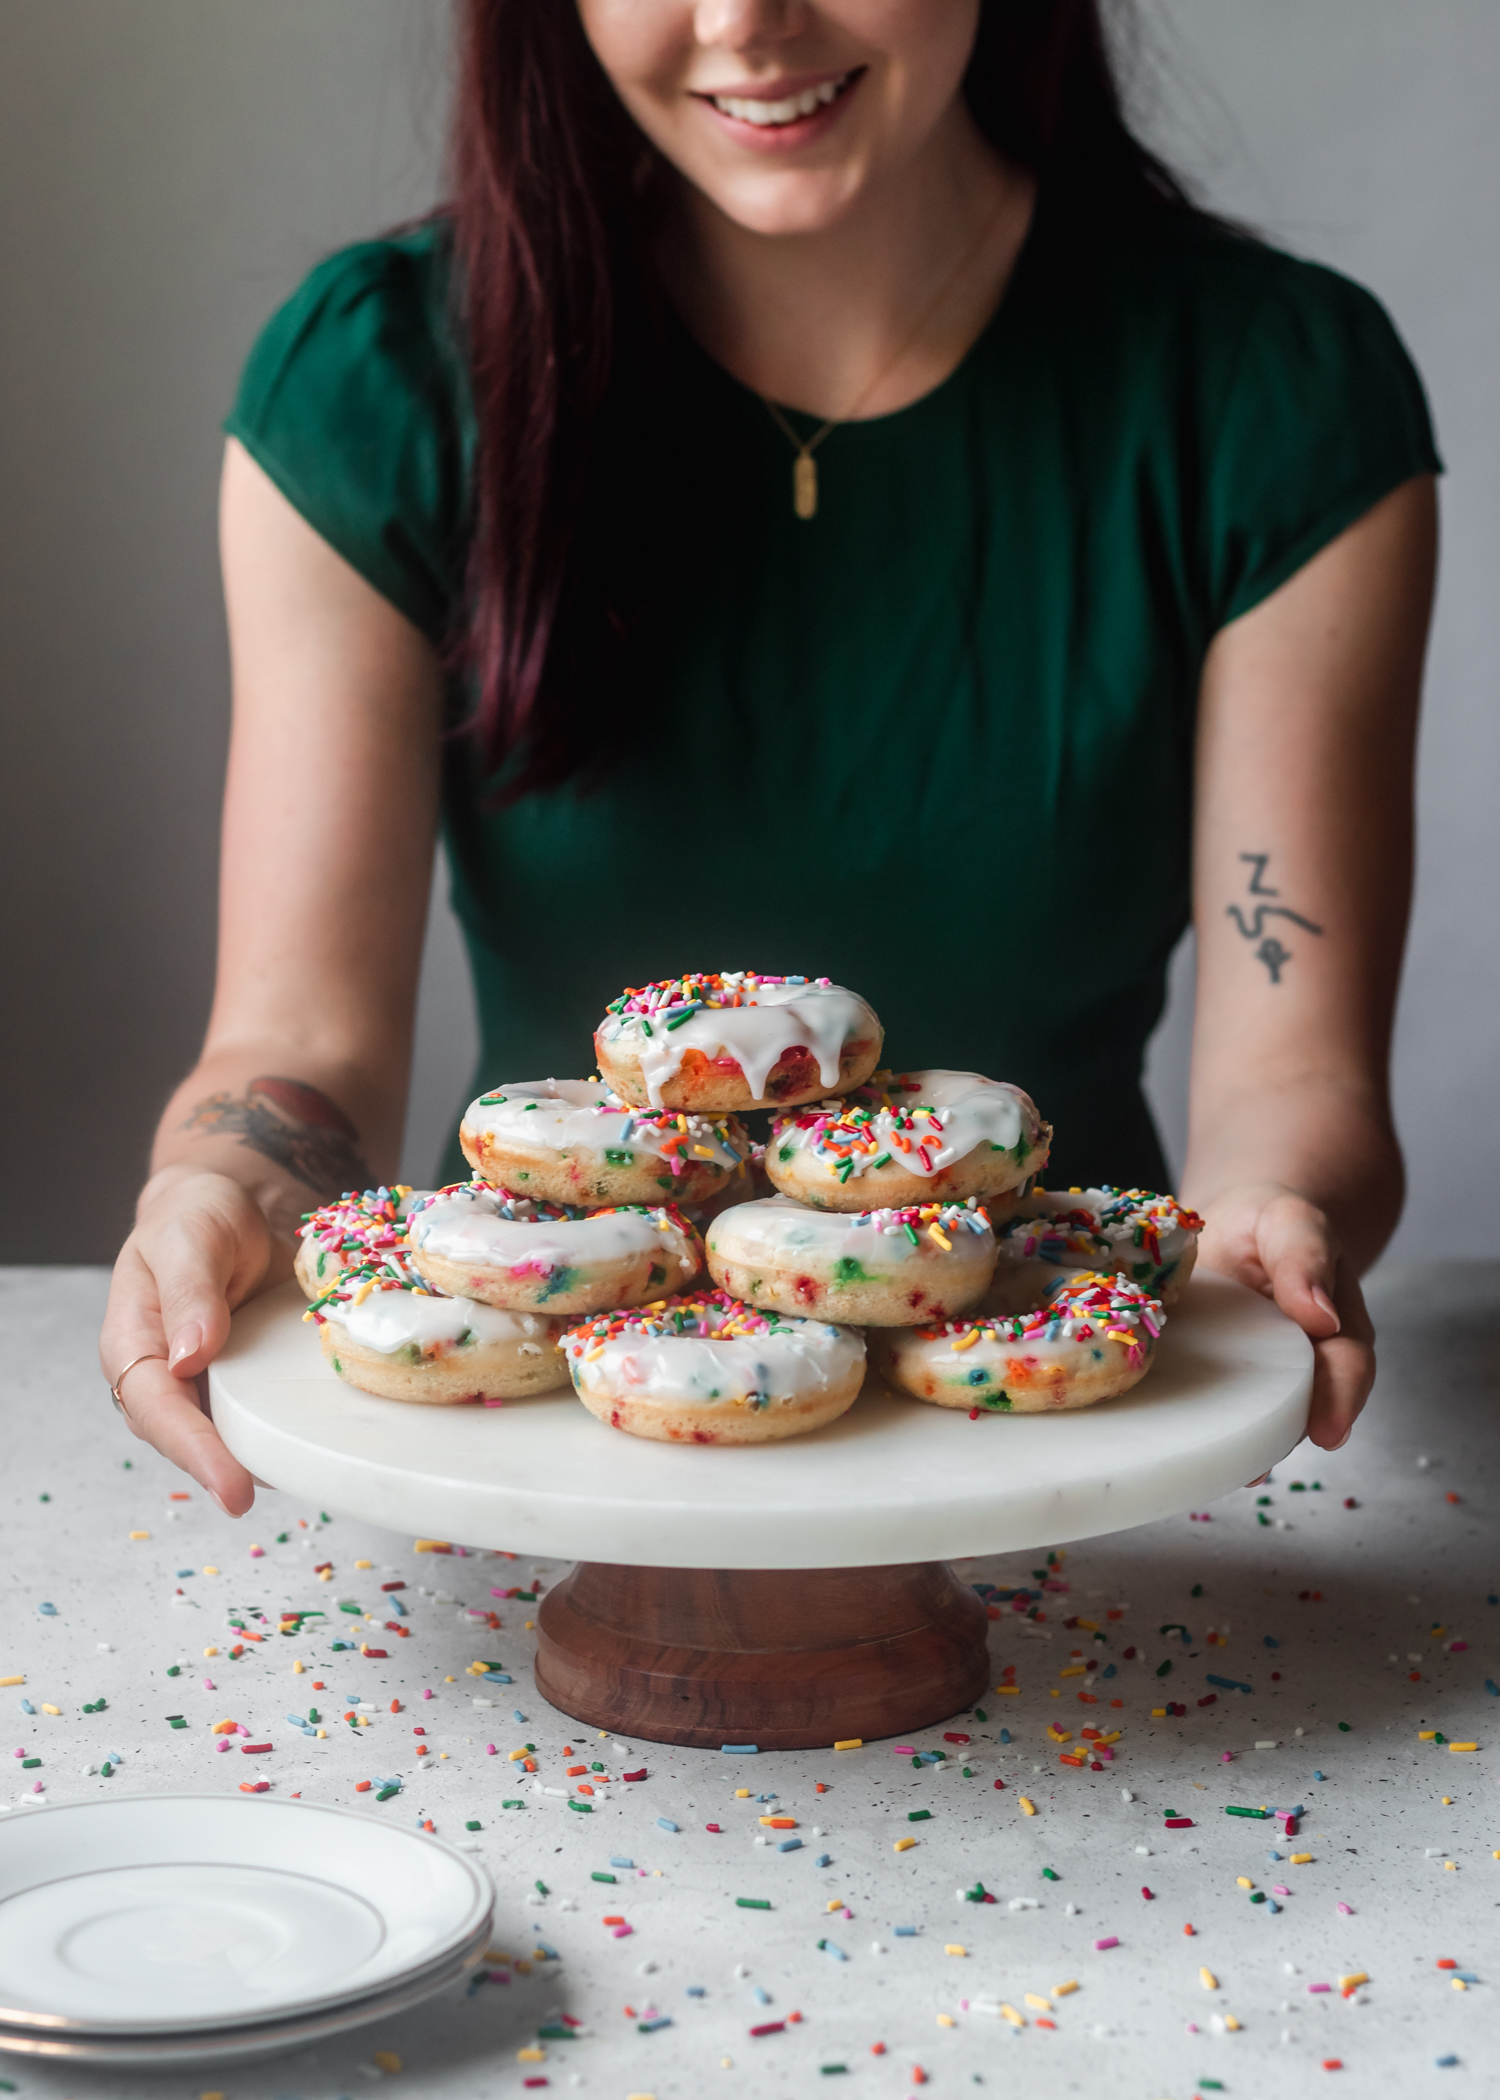 A side shot of a pile of rainbow donuts on a marble cake stand on a white table, with a woman in a dark green dress holding the cake stand.